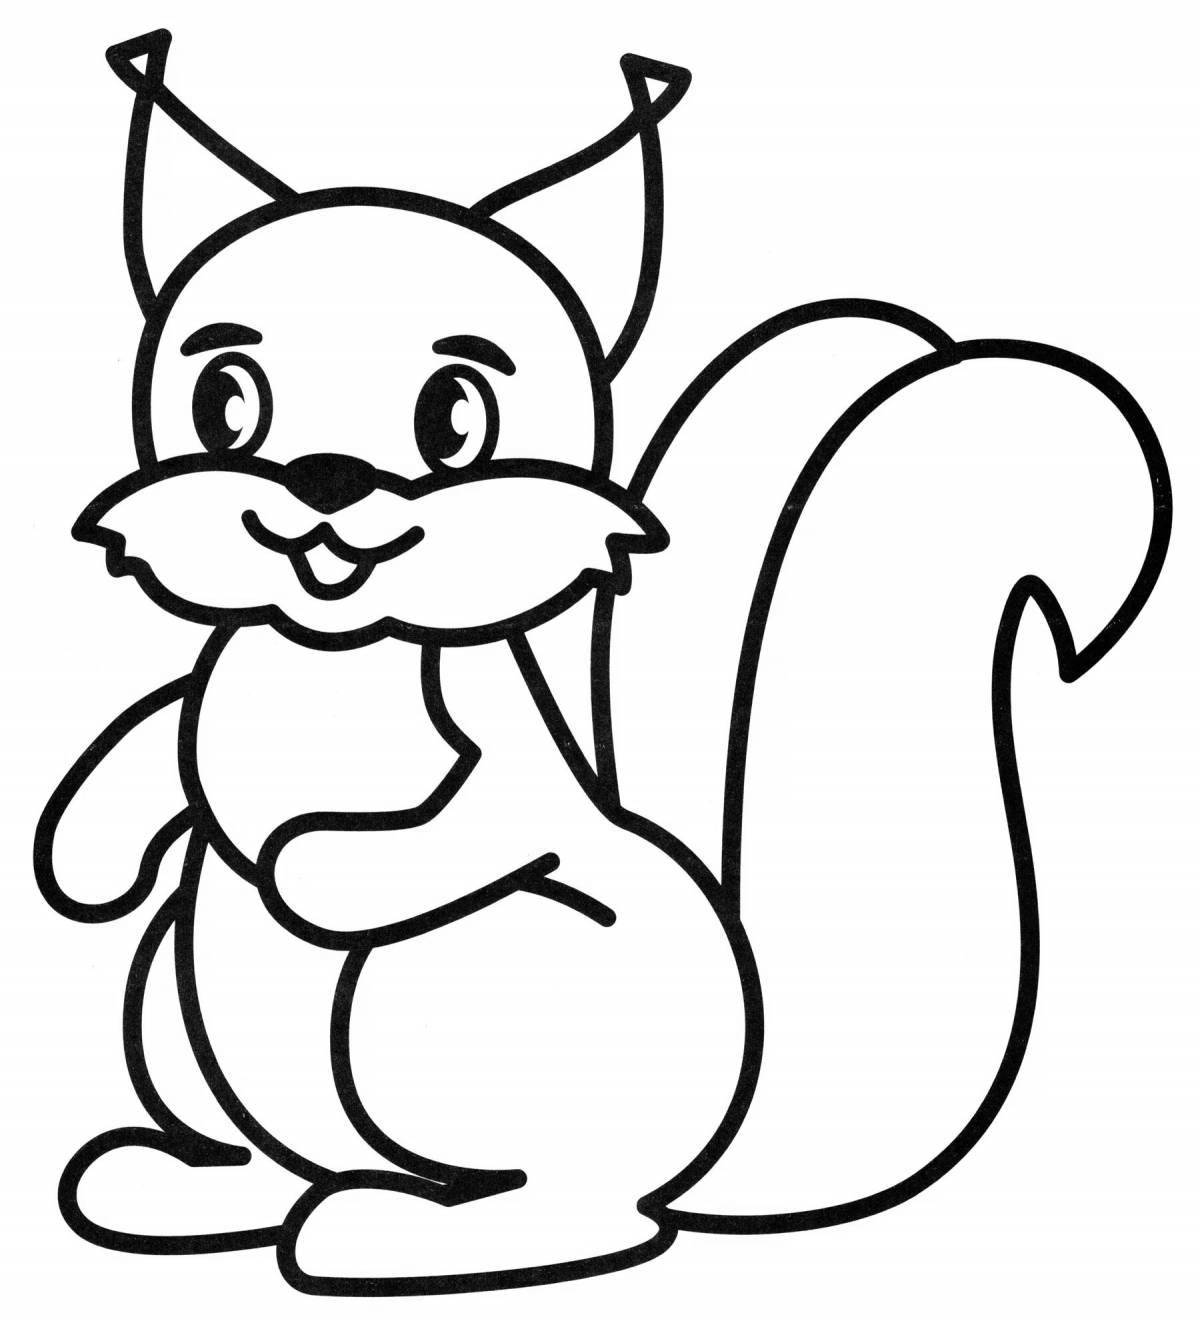 Zany squirrel coloring book for 3-4 year olds